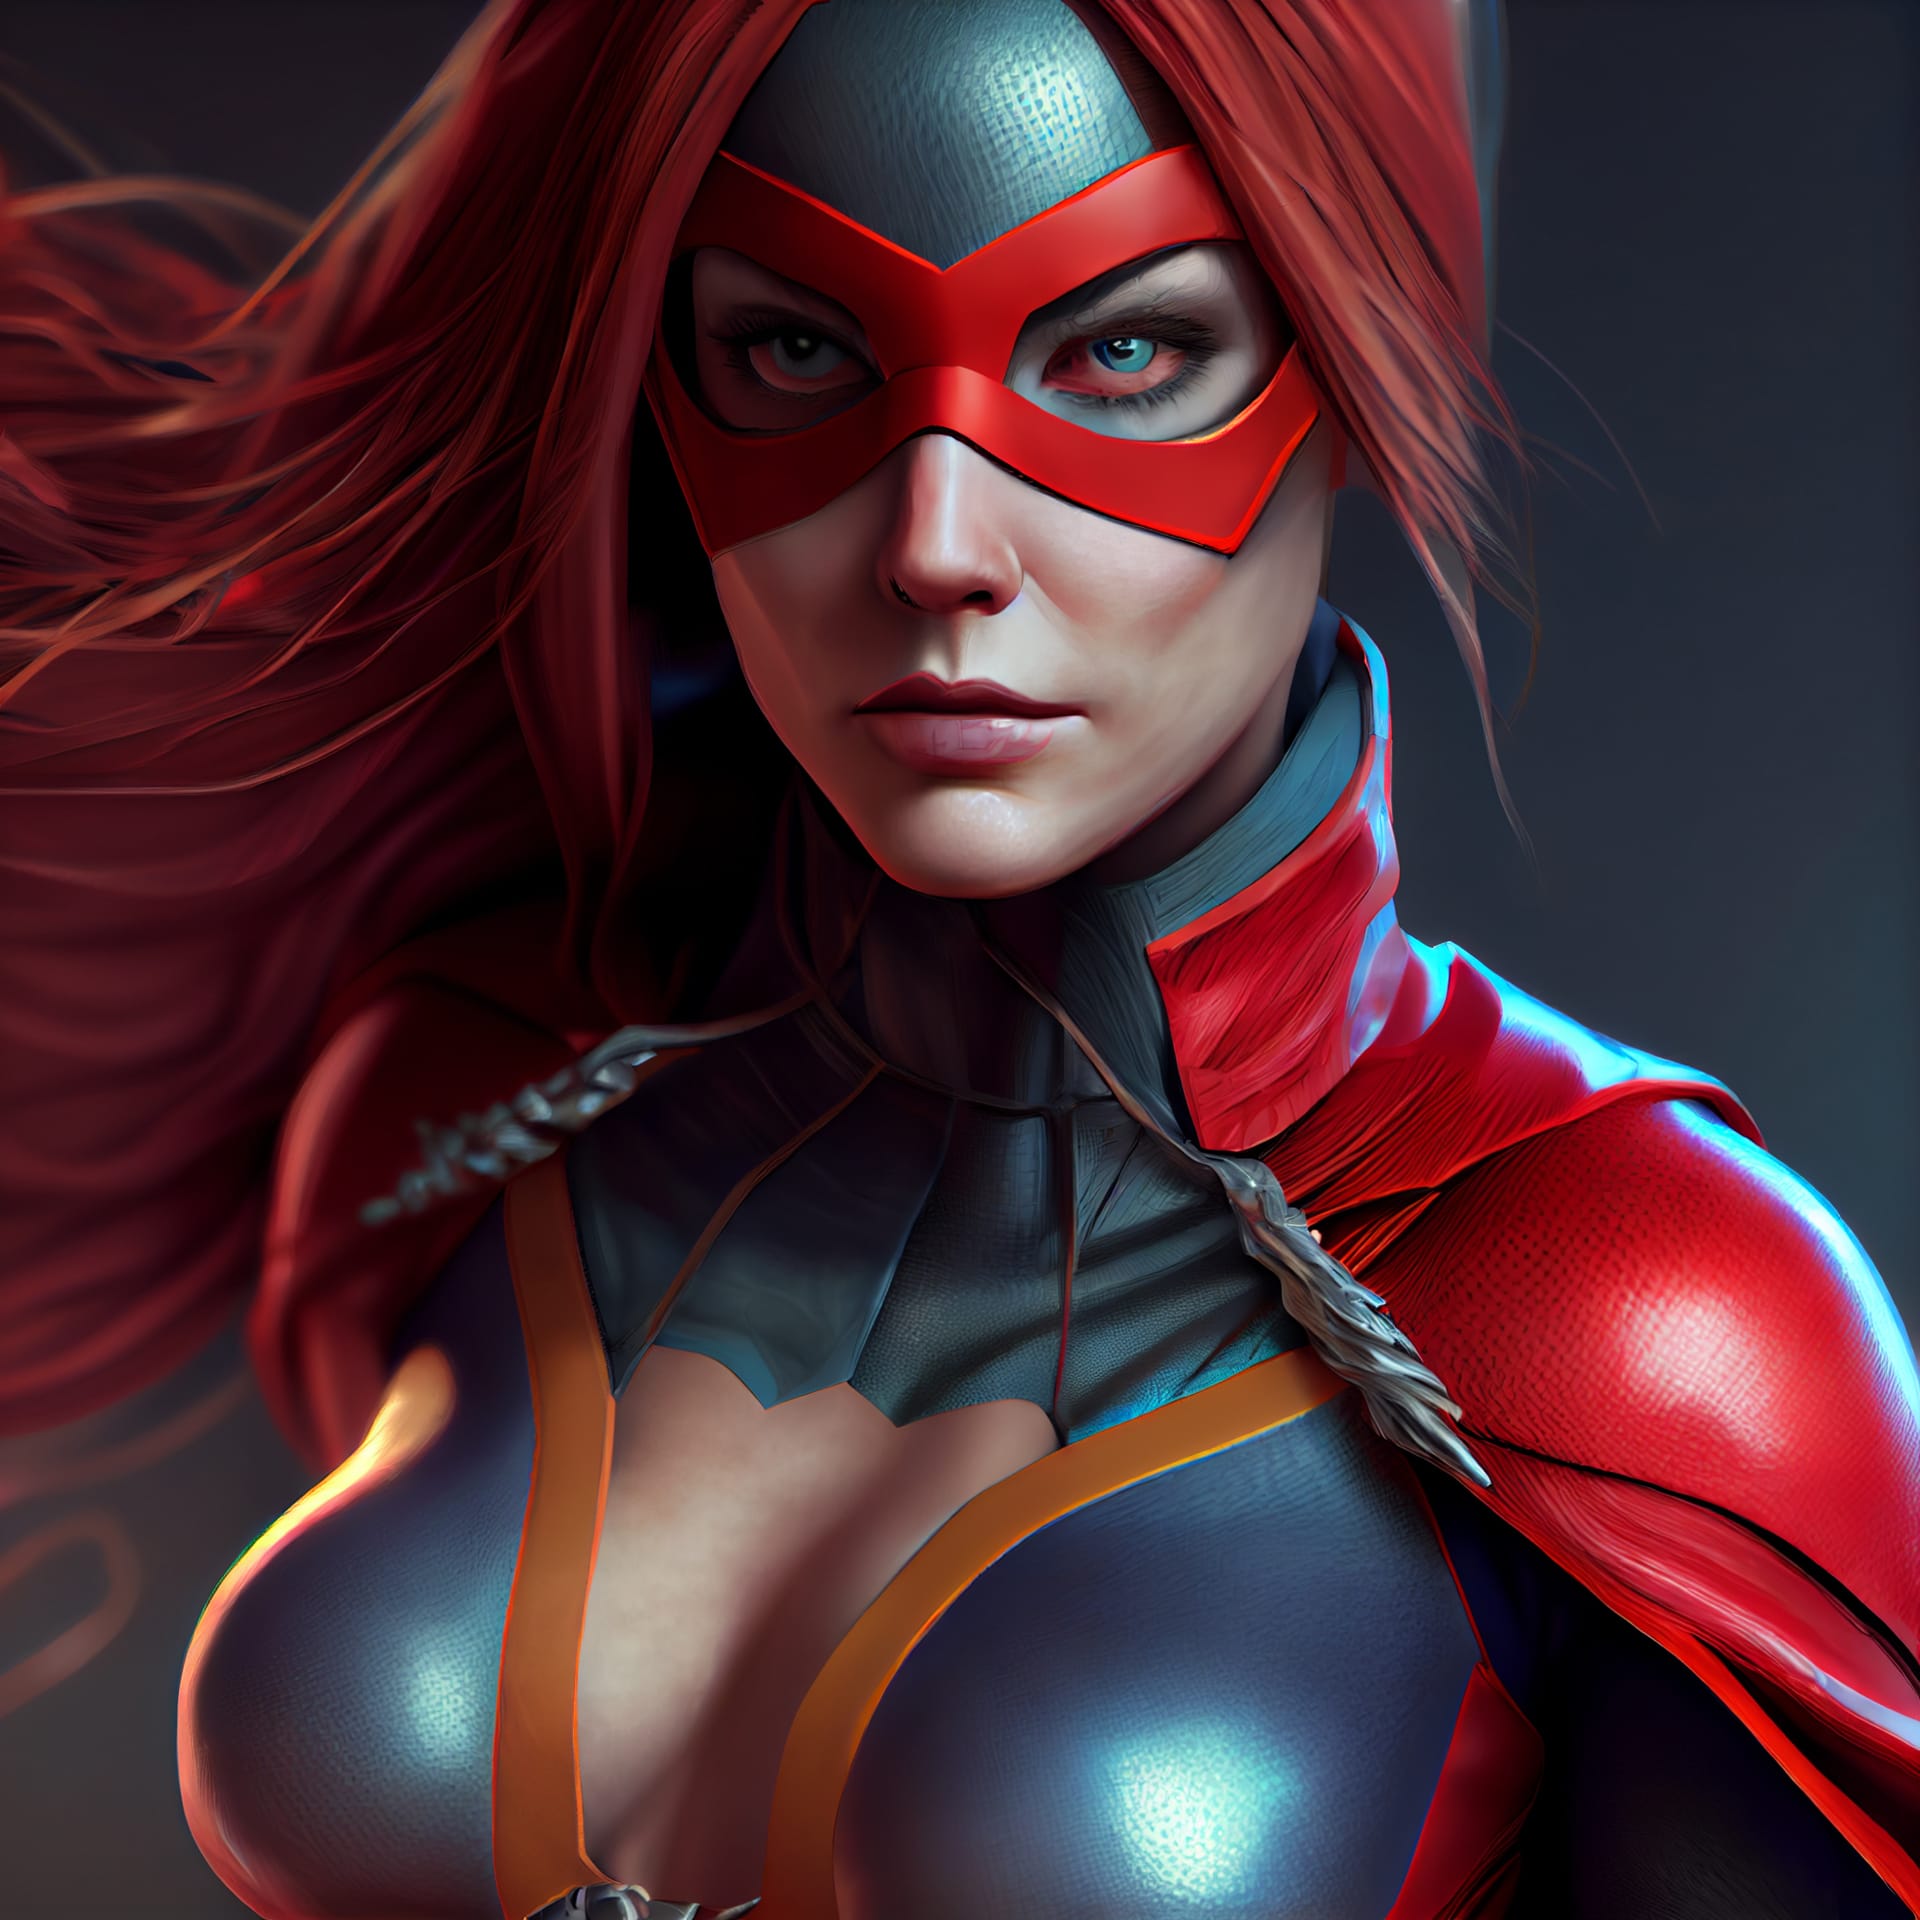 Superheroine woman portrait with superpowers image